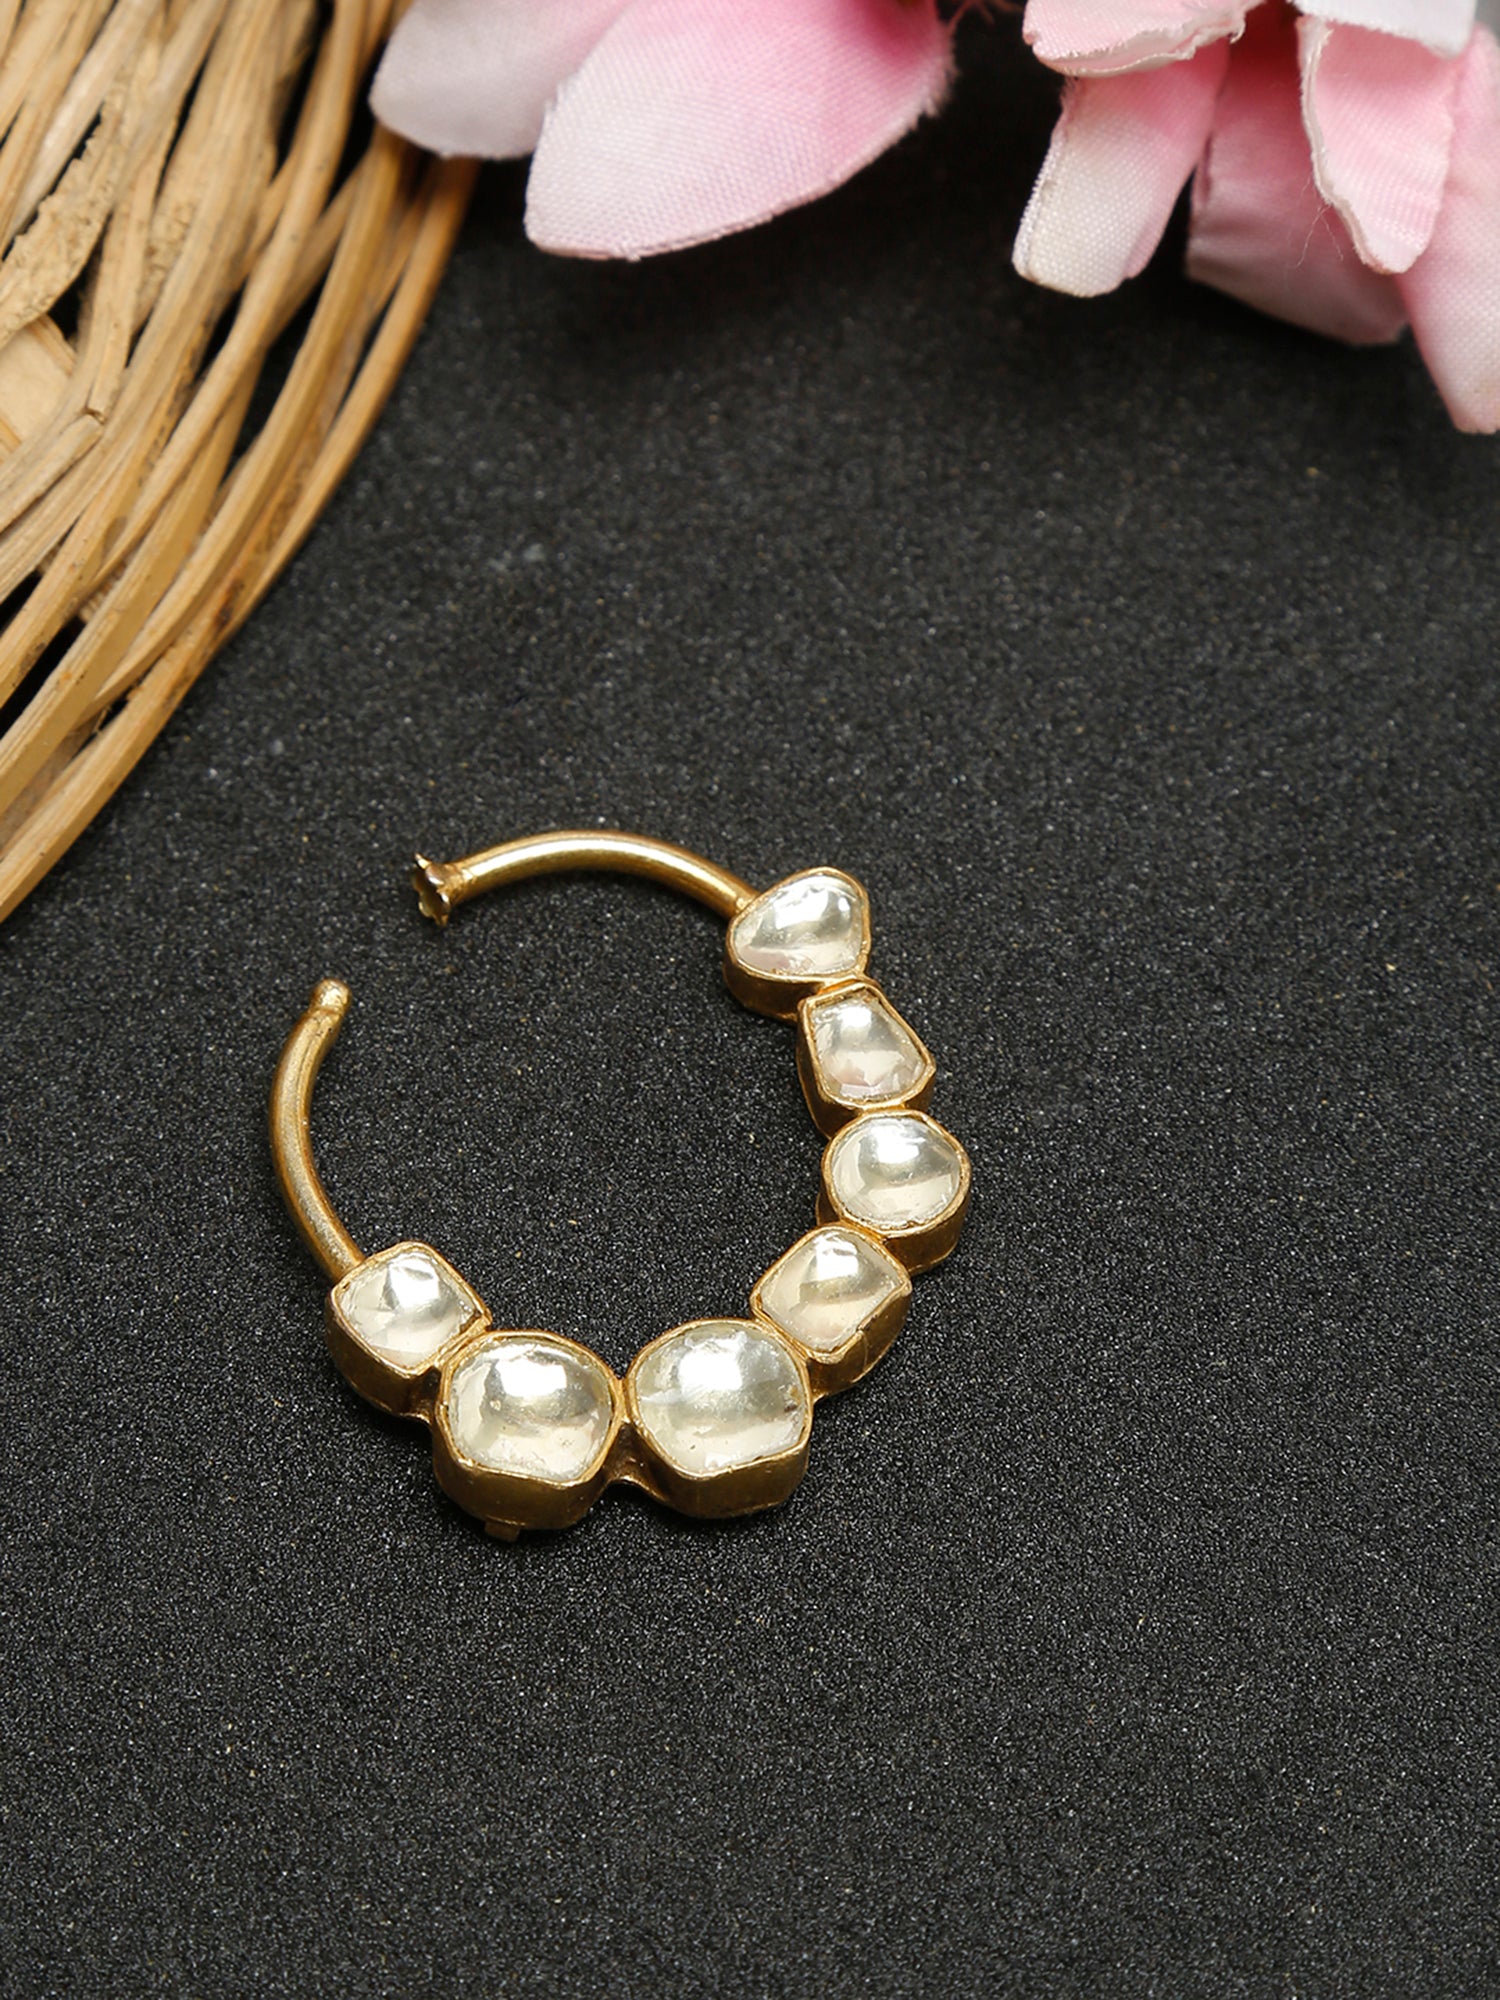 Golden Kundan Nose Ring Without Piercing By Ruby Raang